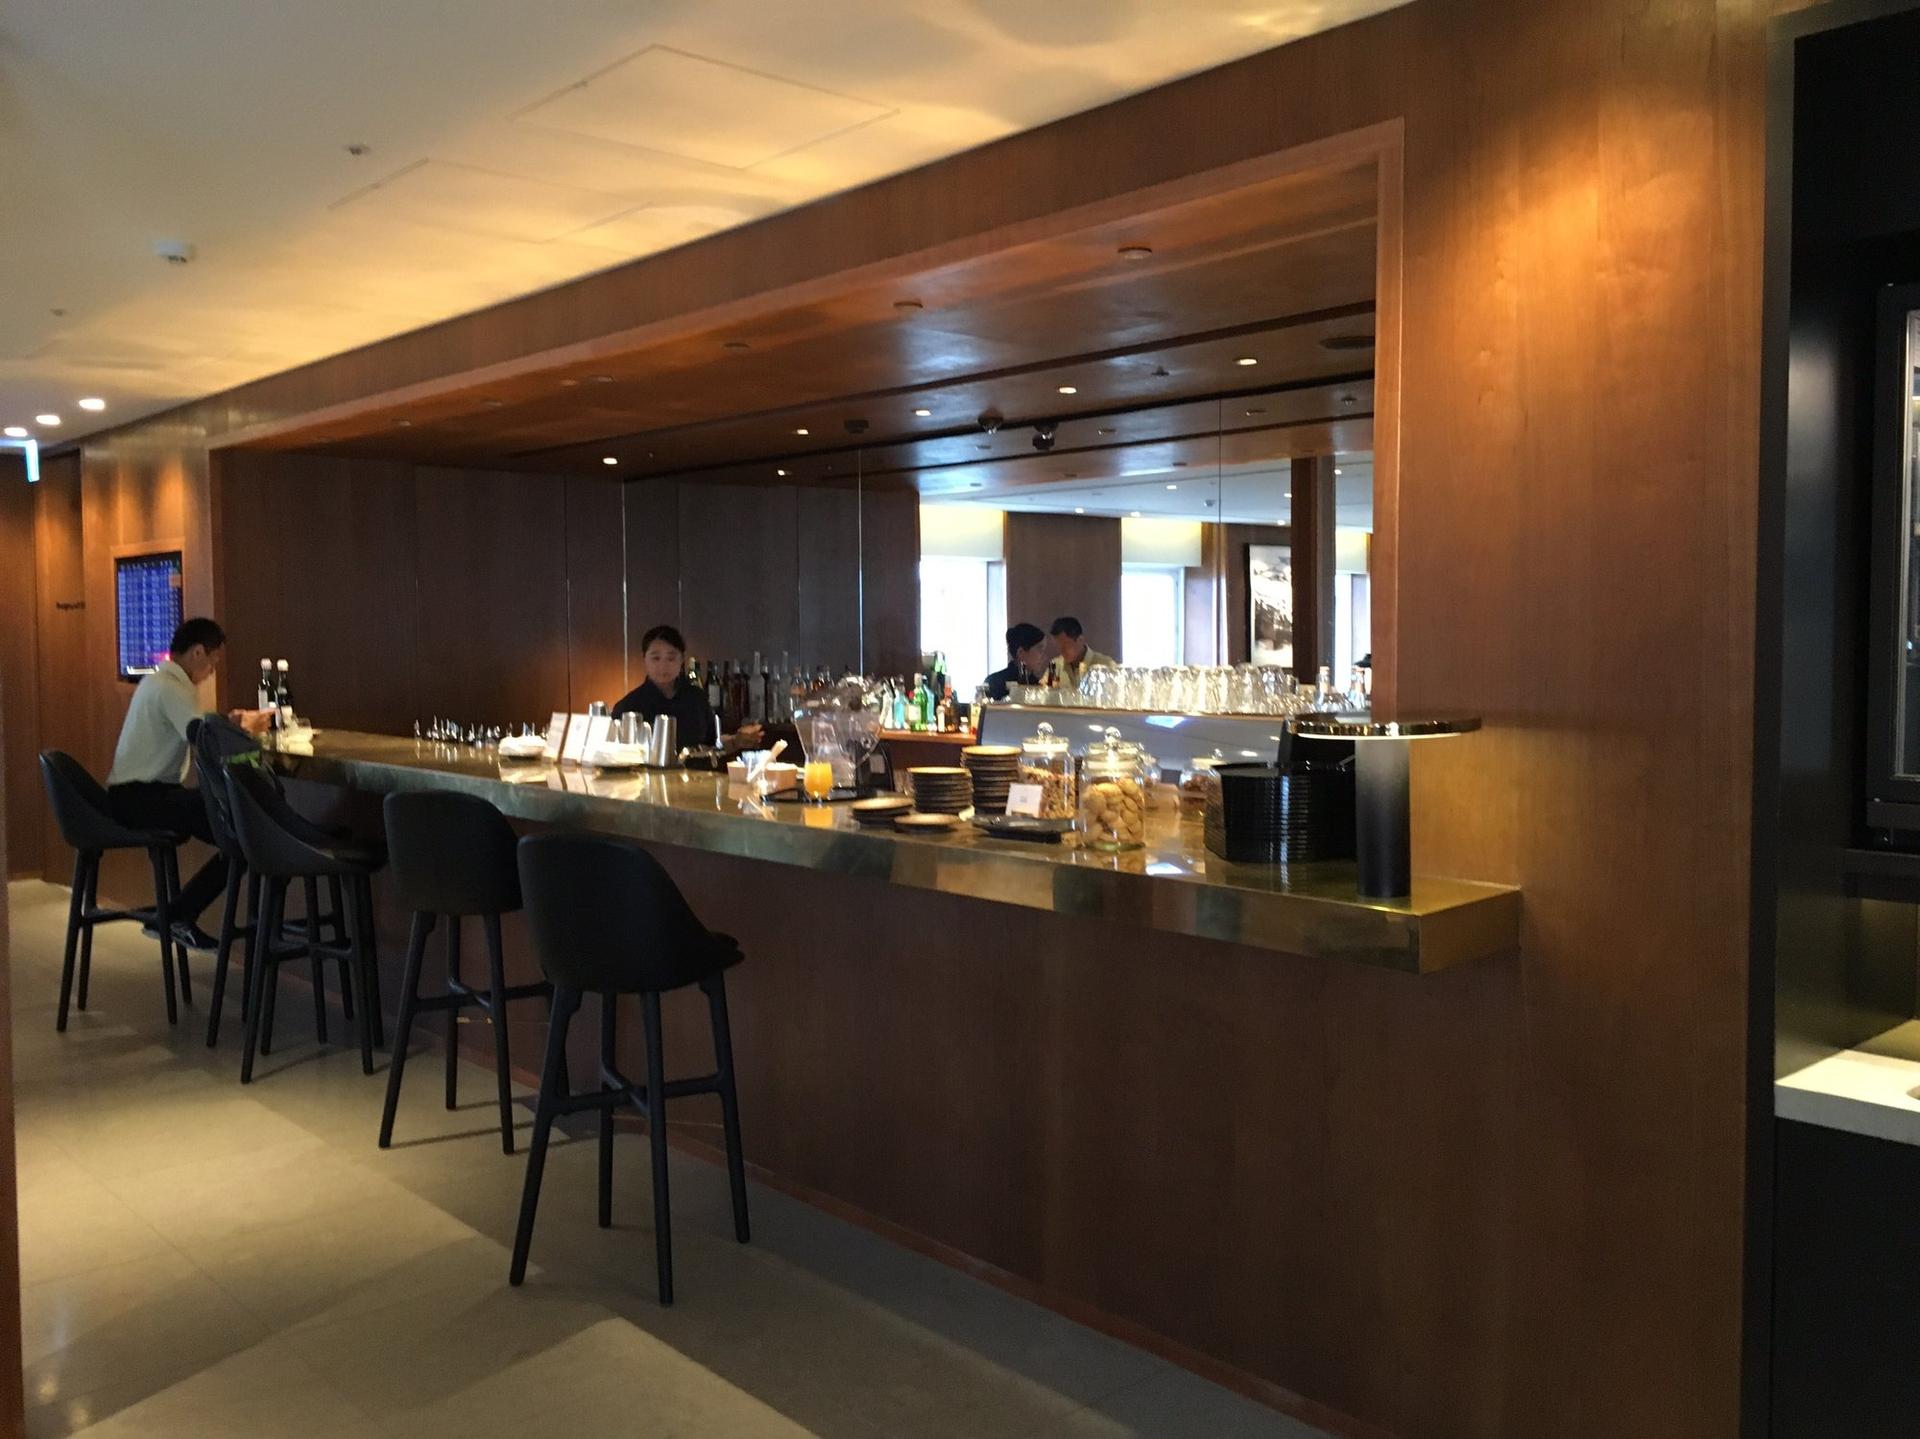 Cathay Pacific Lounge image 14 of 37